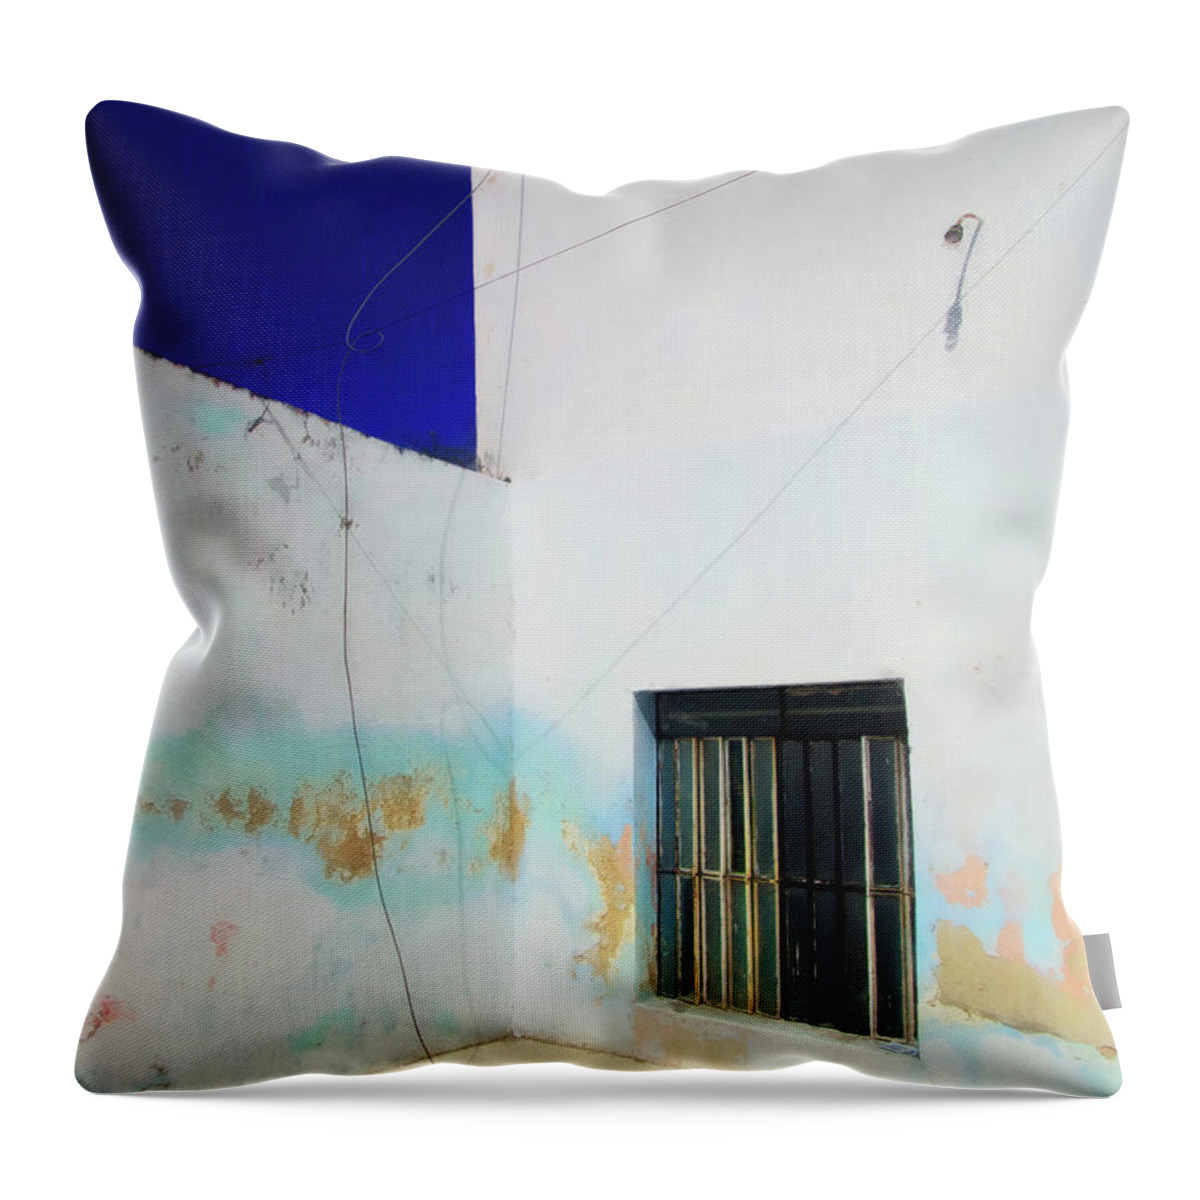 Let's Play Throw Pillow featuring the photograph Let's Play by Skip Hunt